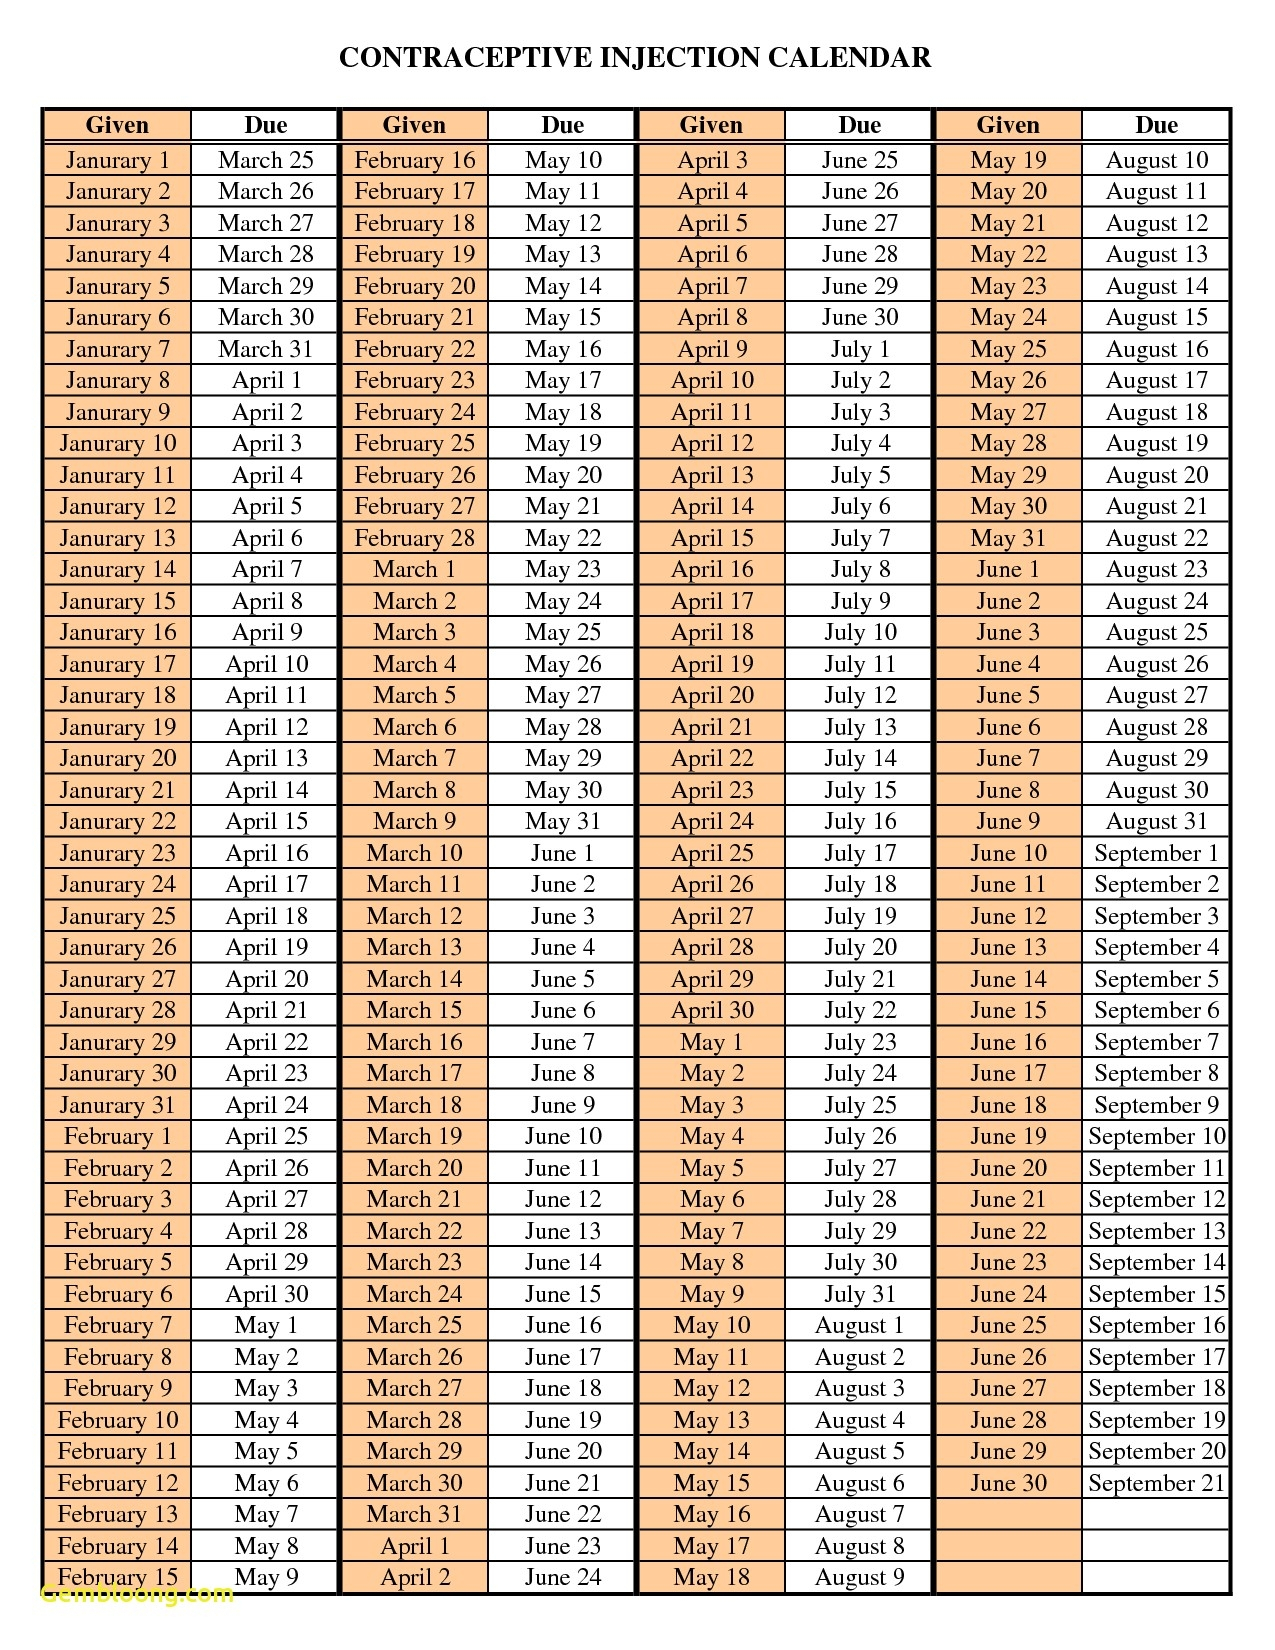 Depo Provera 12 Week Schedule | Printable Calendar  Depo Given 6/25/2021 Next Injection Due